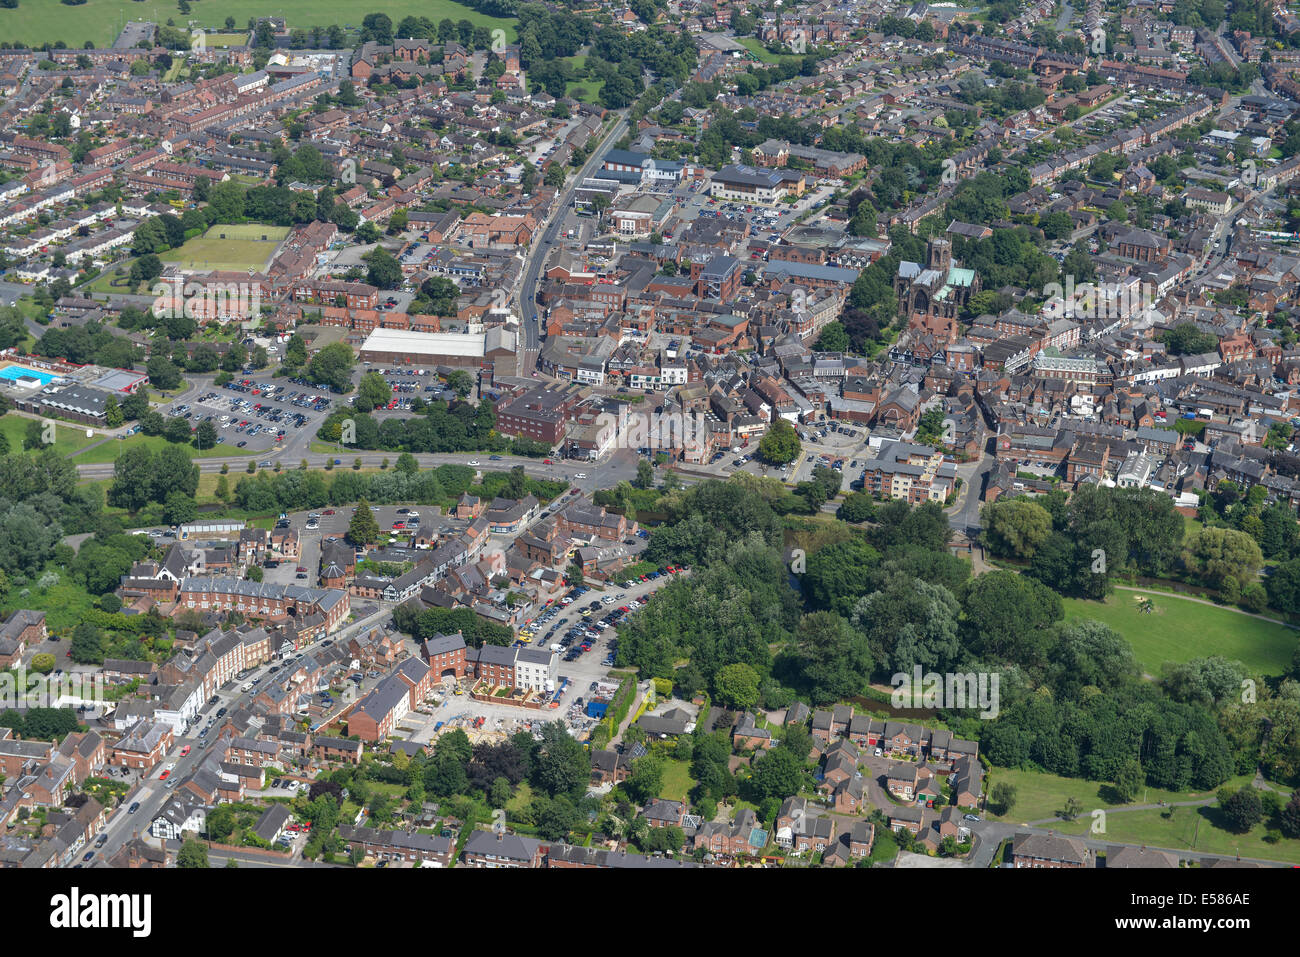 An aerial image showing the town centre of Nantwich in Cheshire, UK Stock Photo